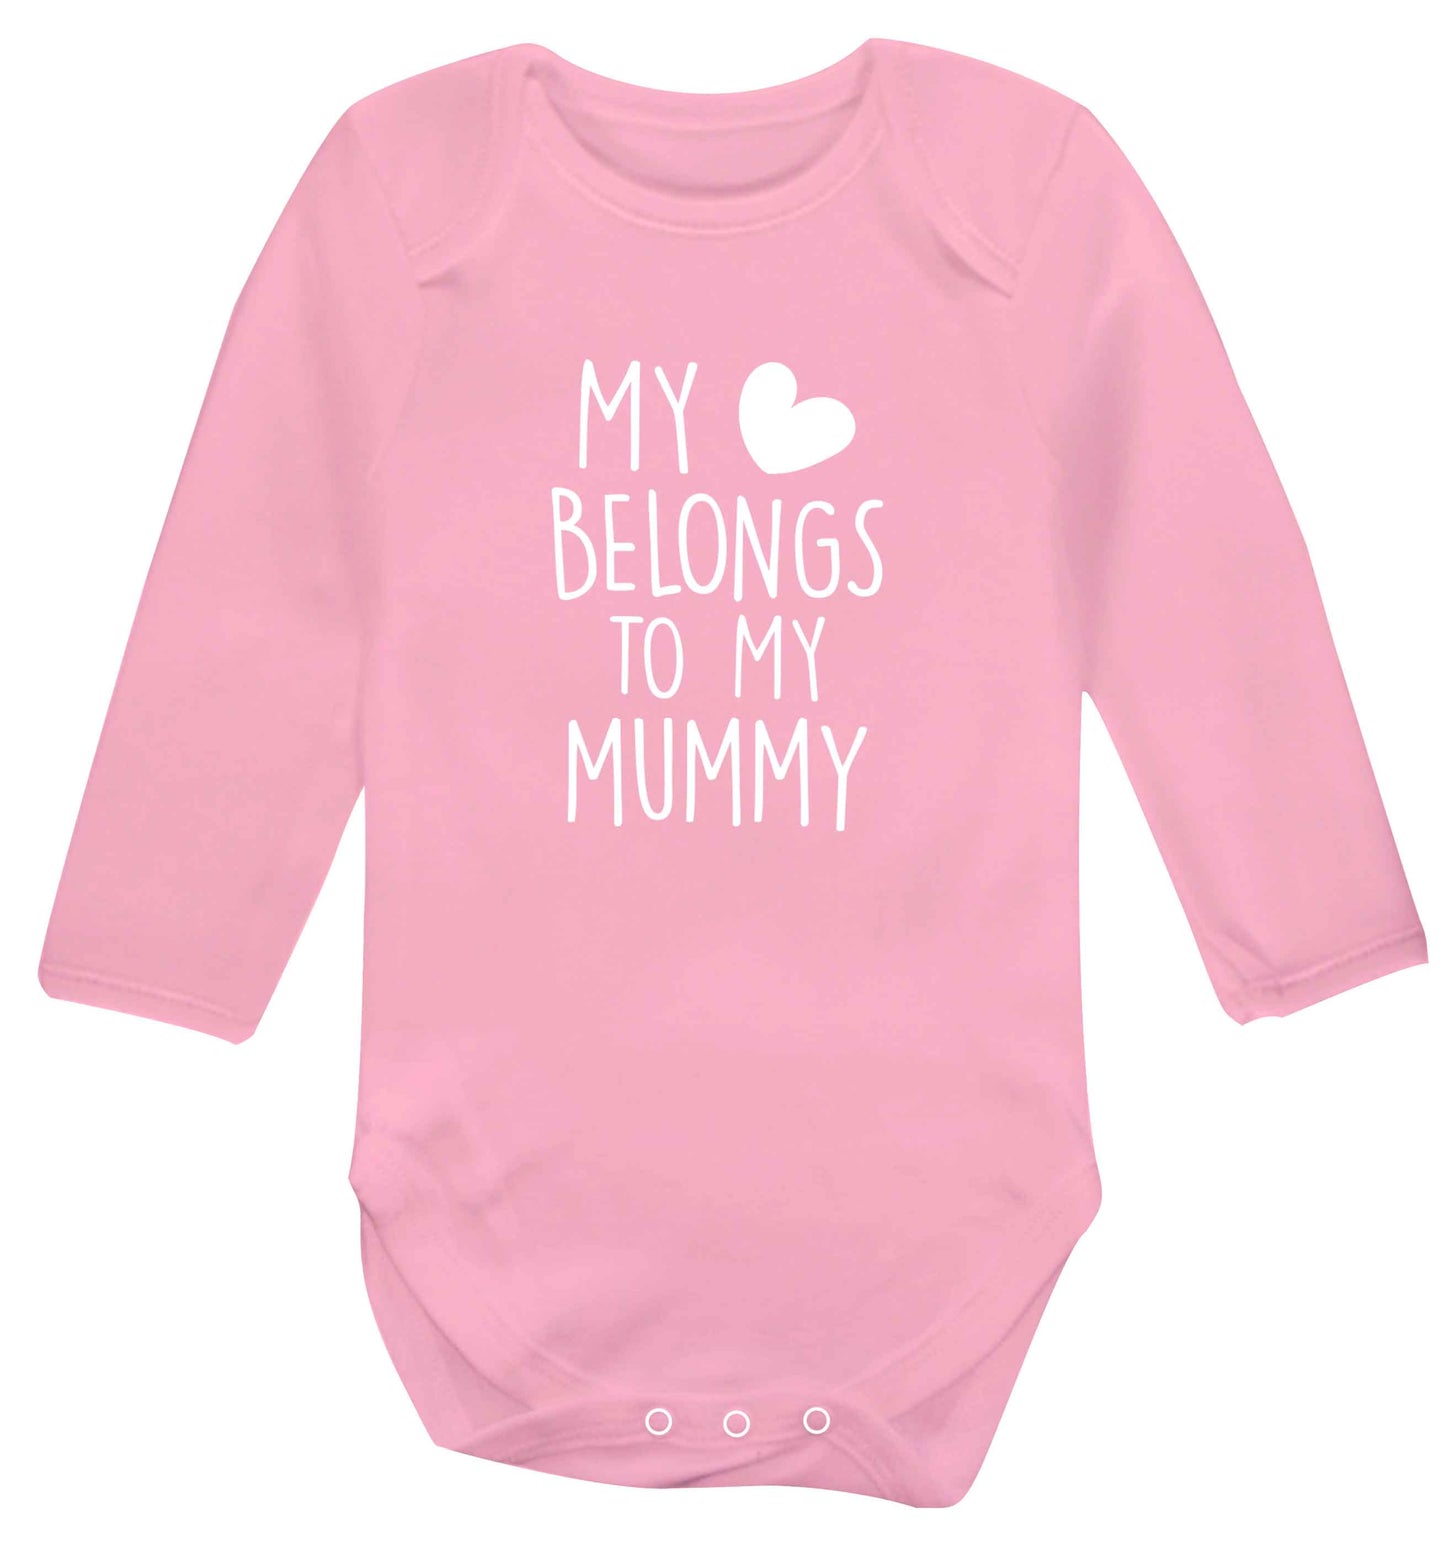 My heart belongs to my mummy baby vest long sleeved pale pink 6-12 months